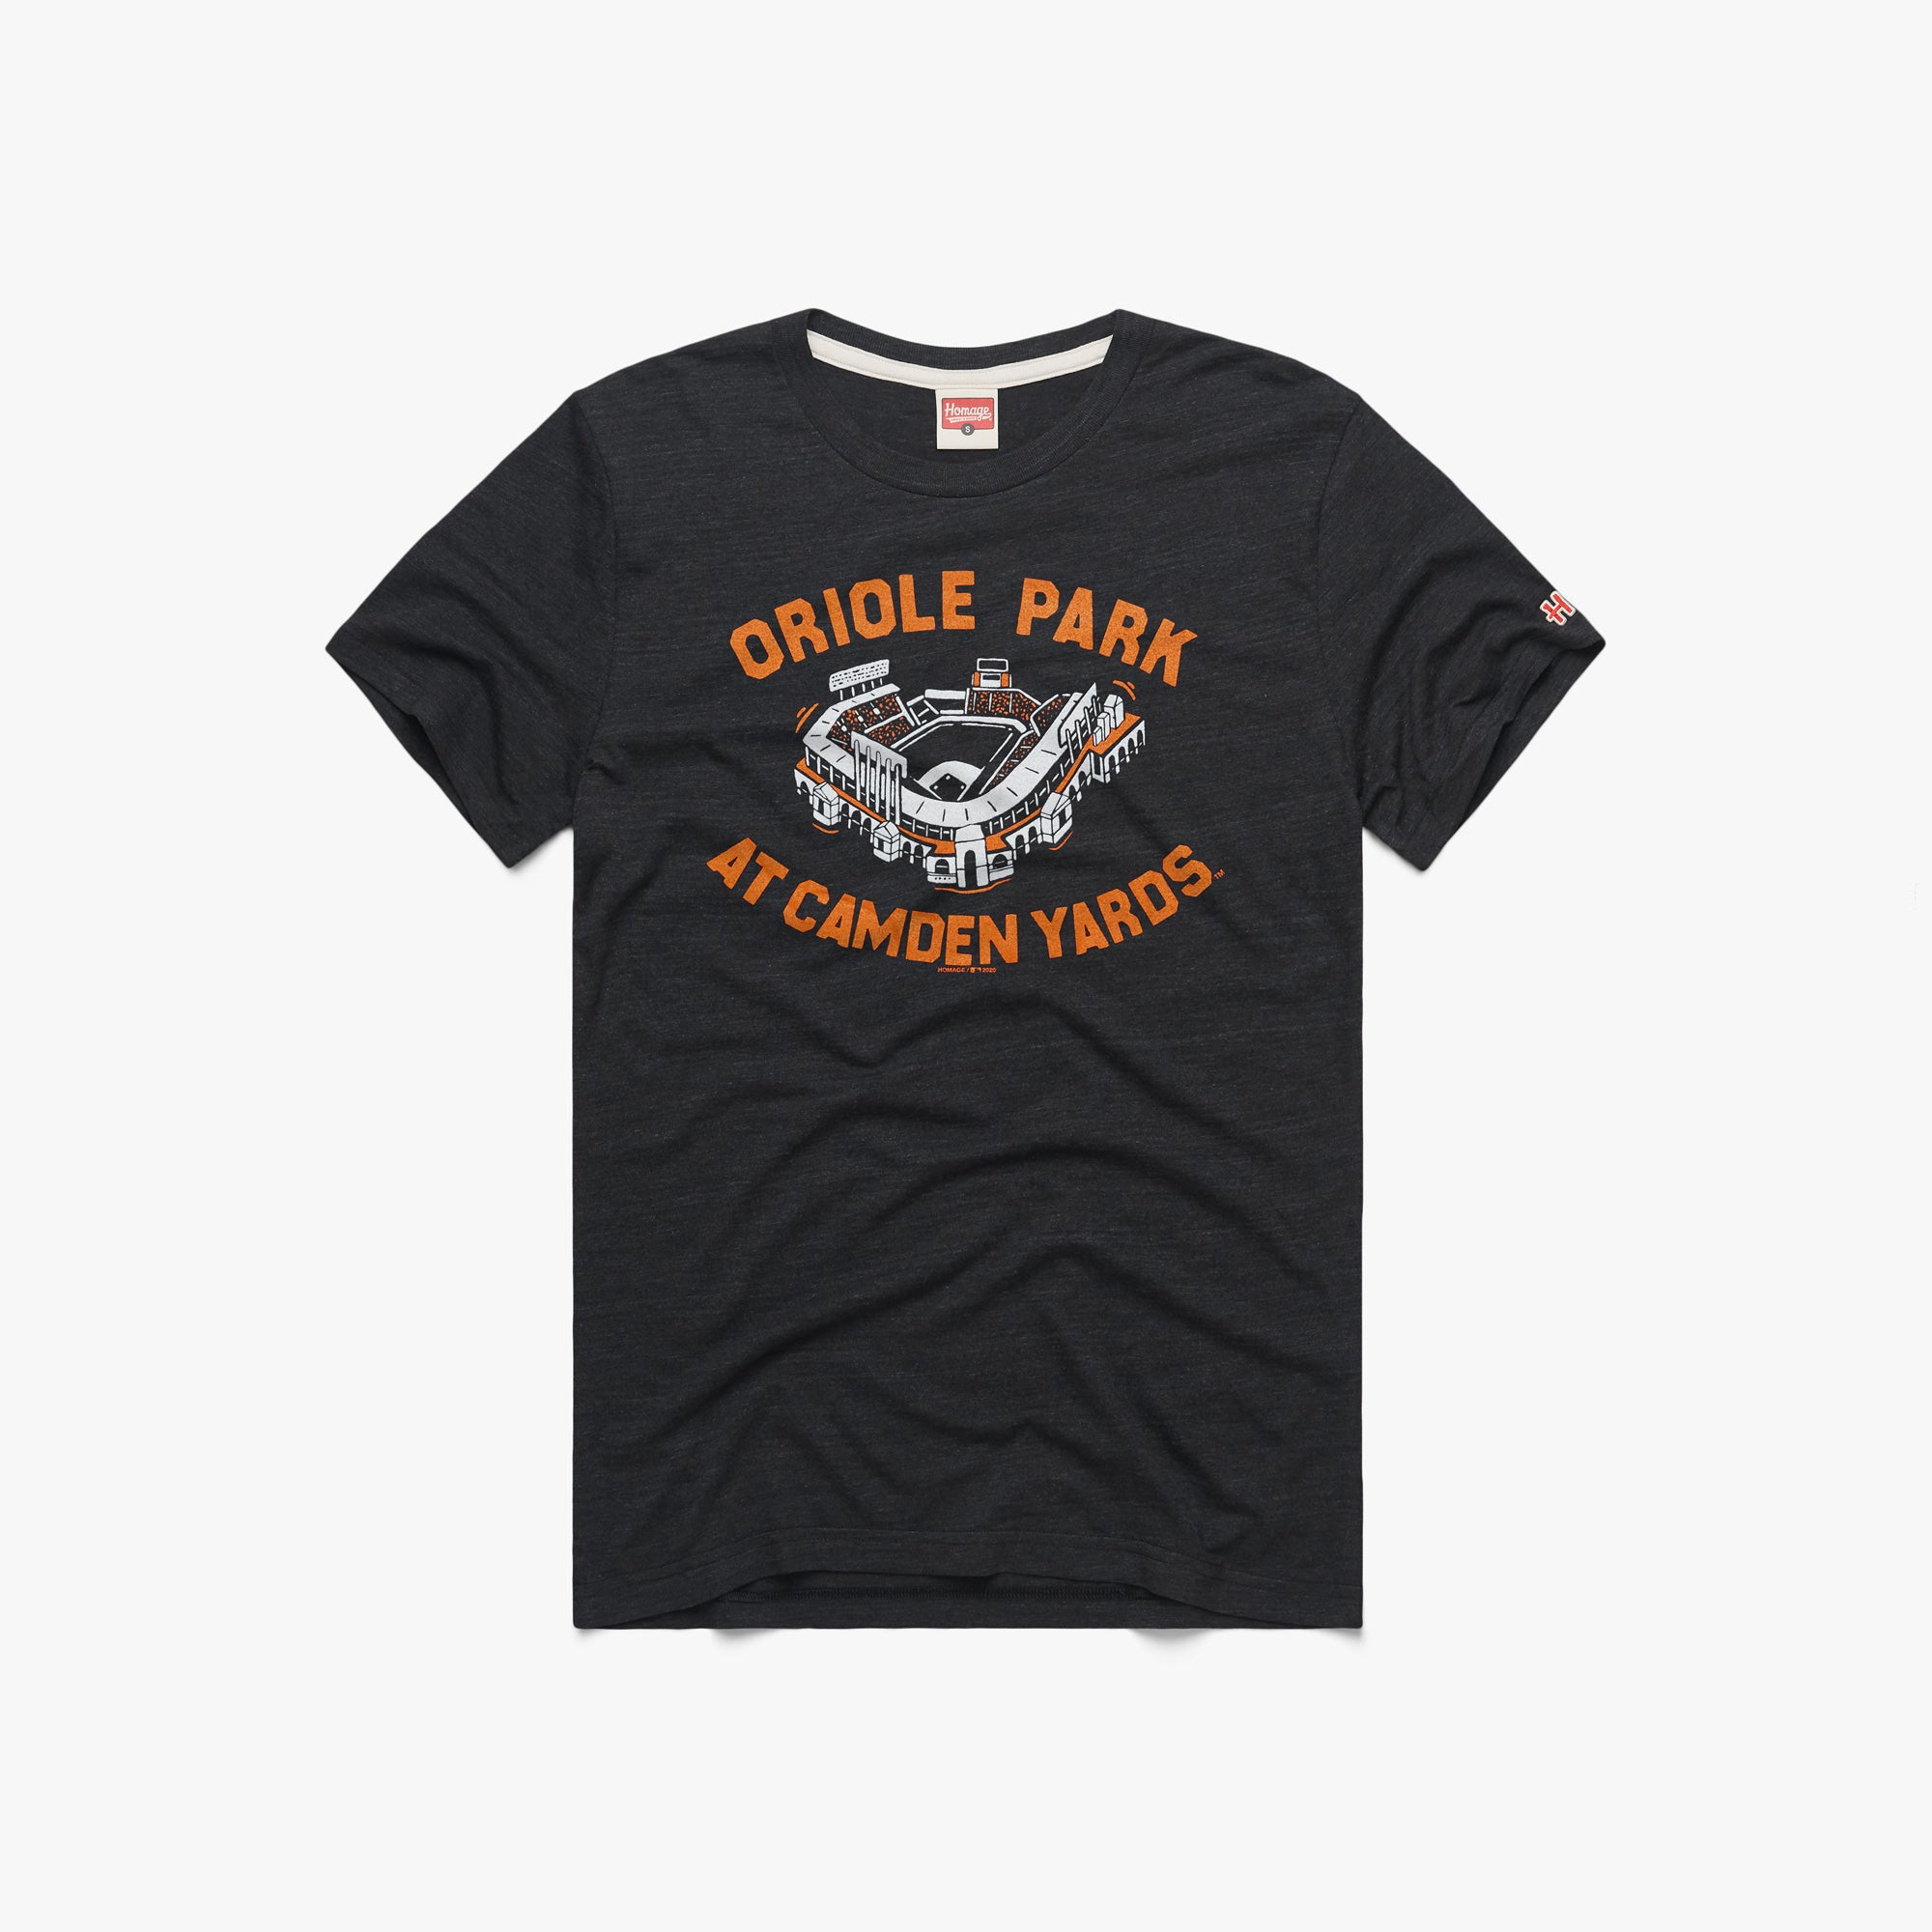 Get some new Orioles shirts for the season and support Camden Chat